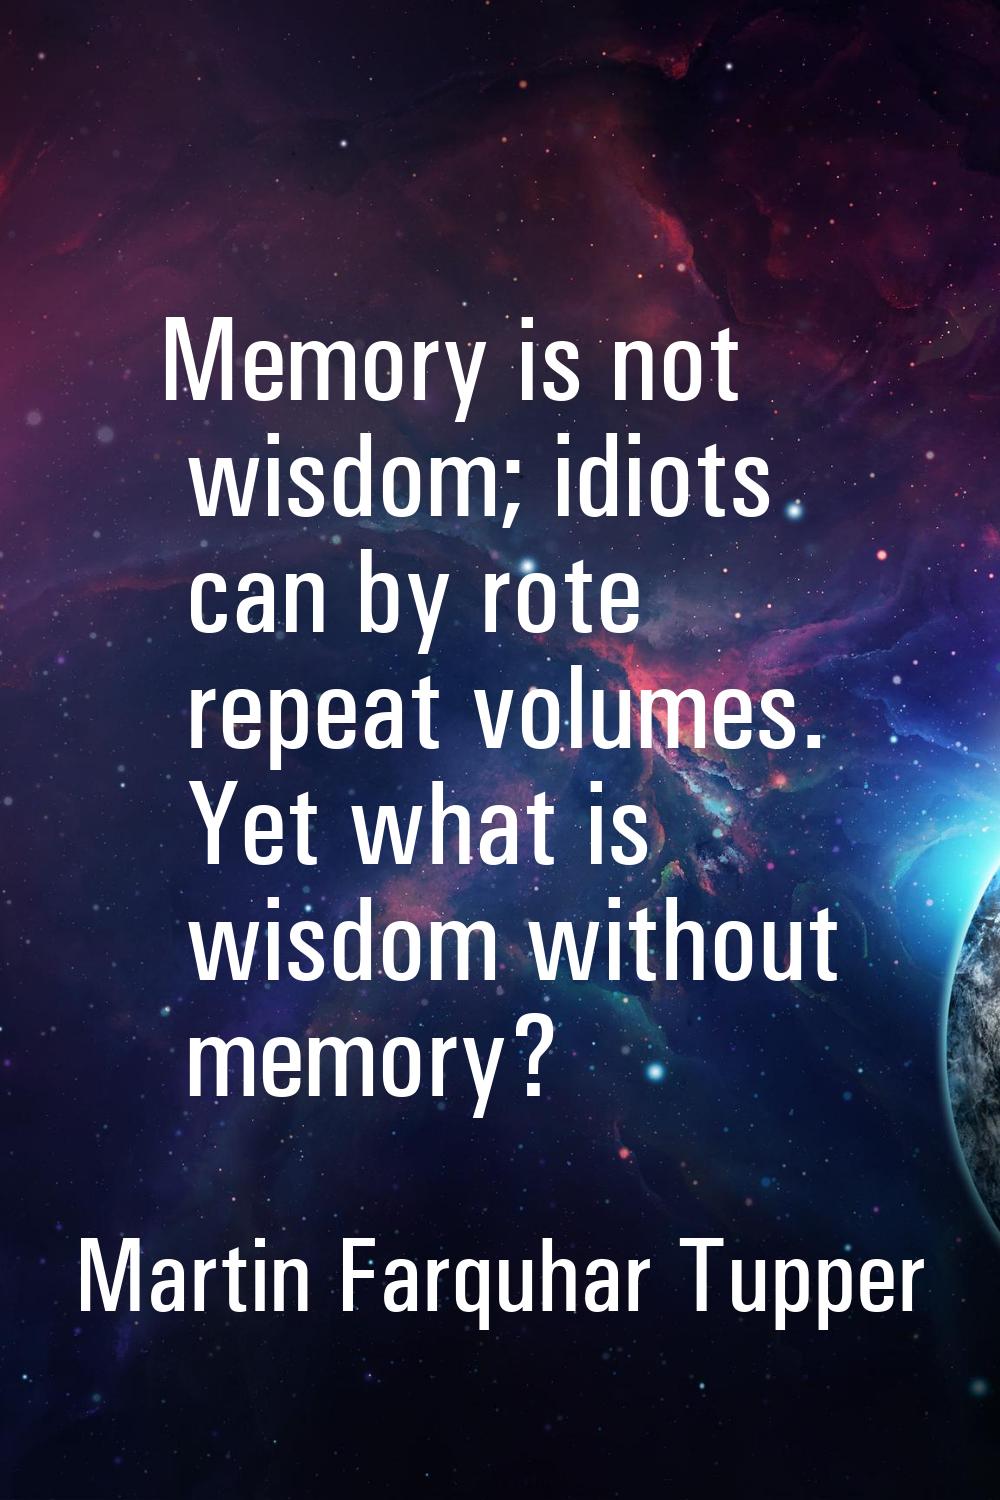 Memory is not wisdom; idiots can by rote repeat volumes. Yet what is wisdom without memory?